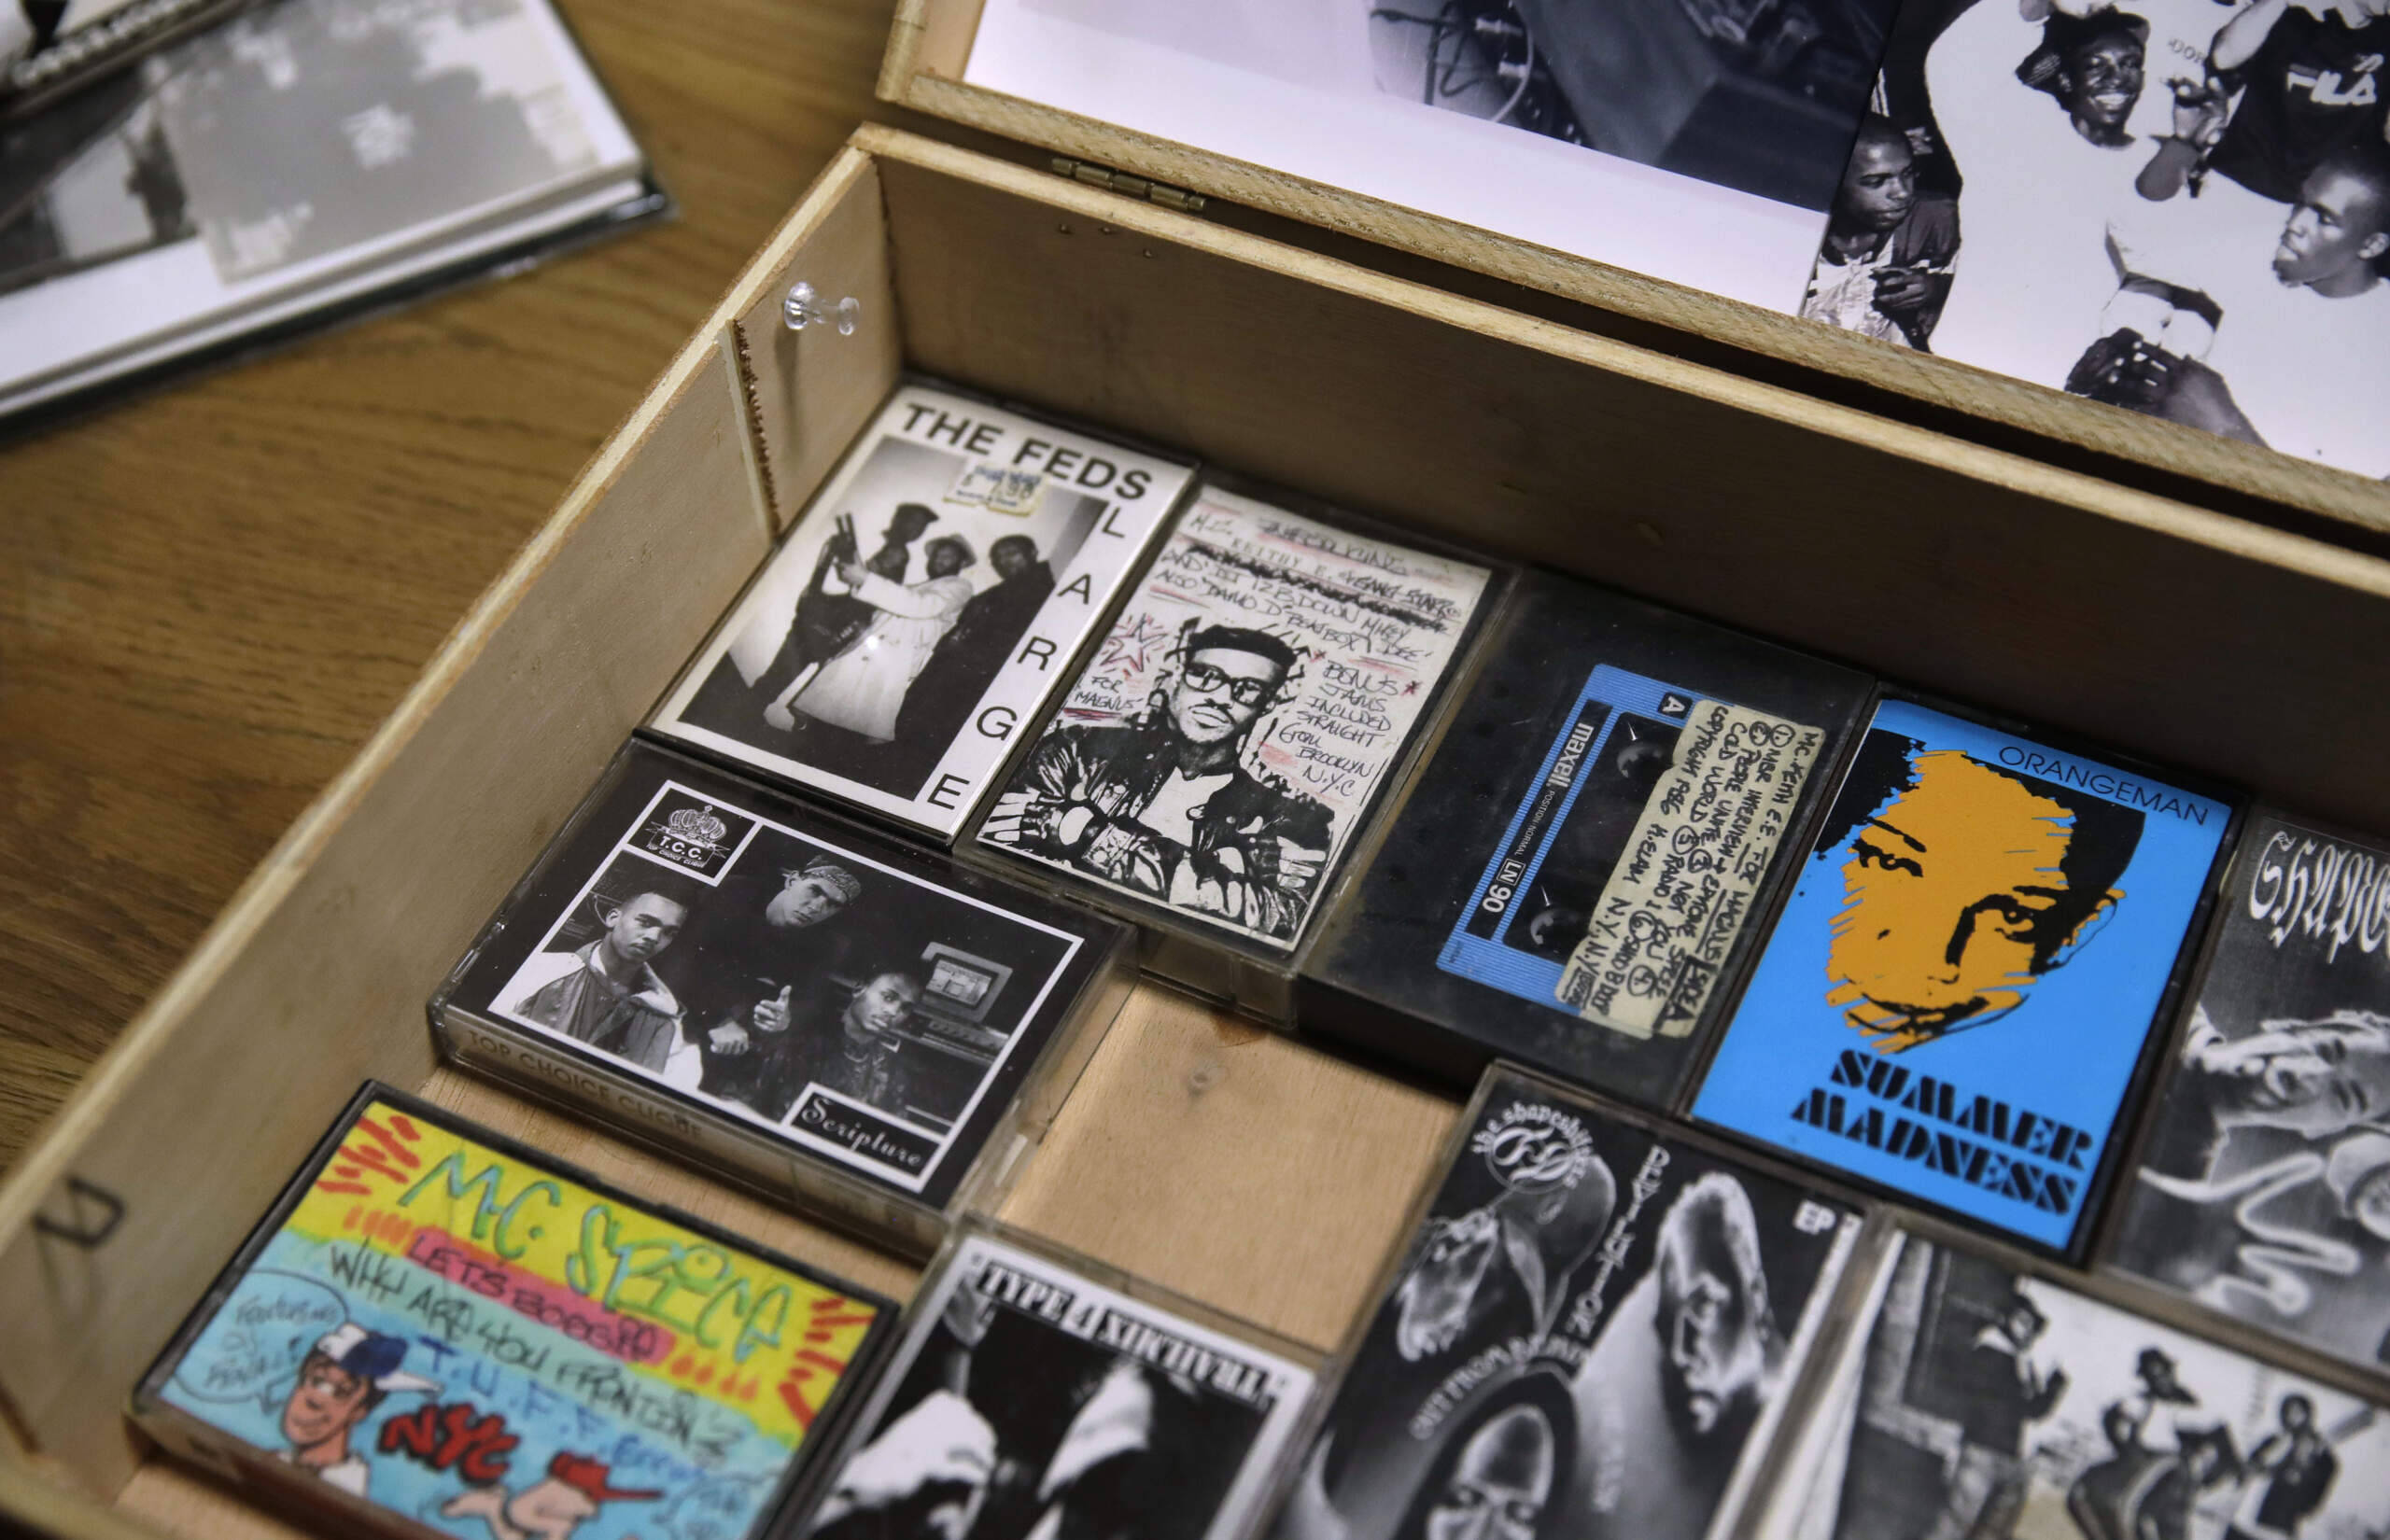 A collection of hip-hop cassette tapes and memorabilia from the 1980's are displayed at the Boston campus of the University of Massachusetts in Boston, Thursday, Nov. 17, 2016. (Charles Krupa/AP)